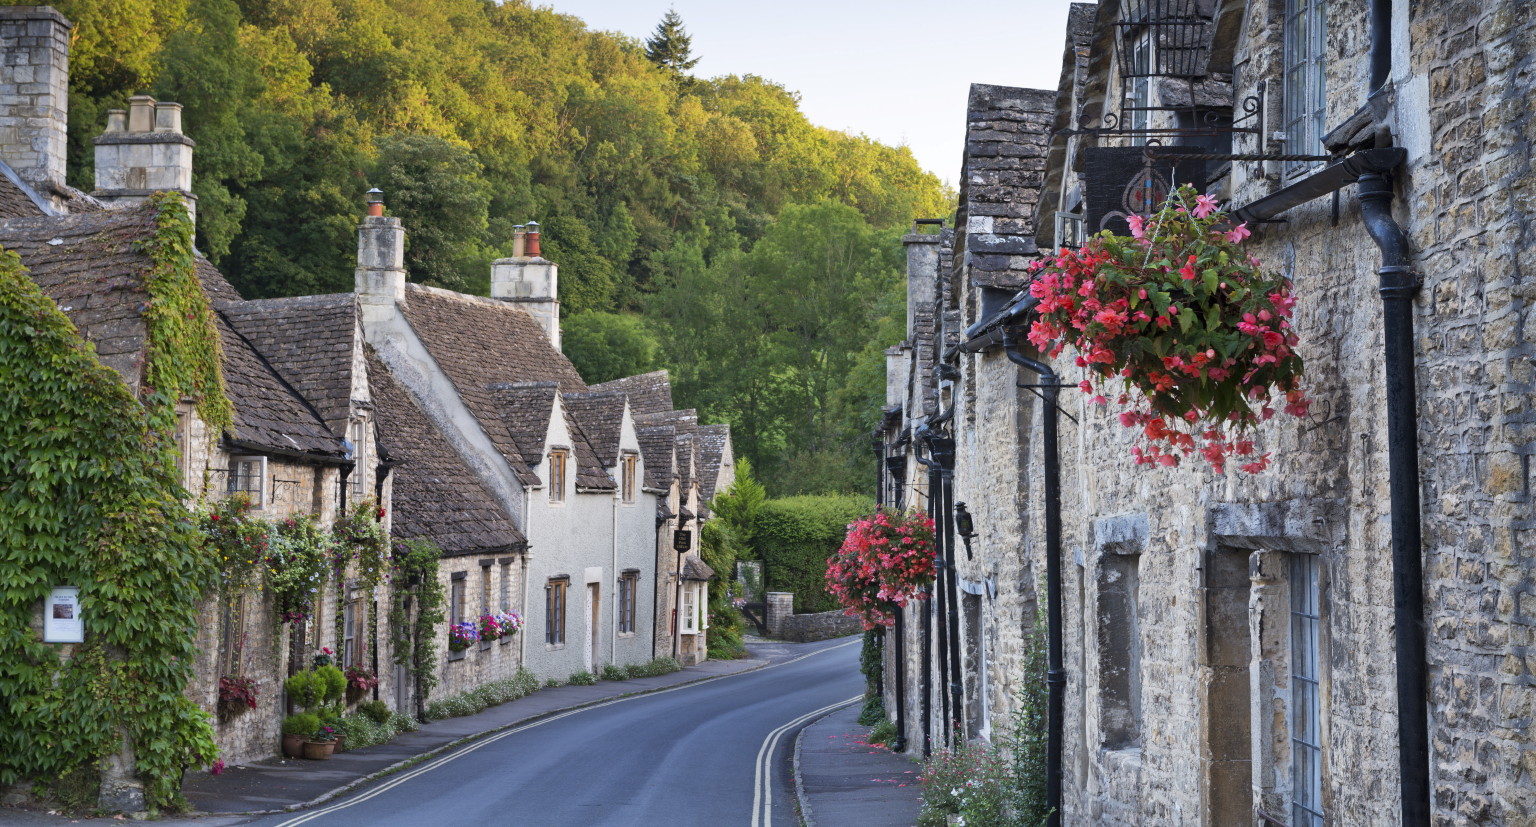 Quaint English towns in the countryside